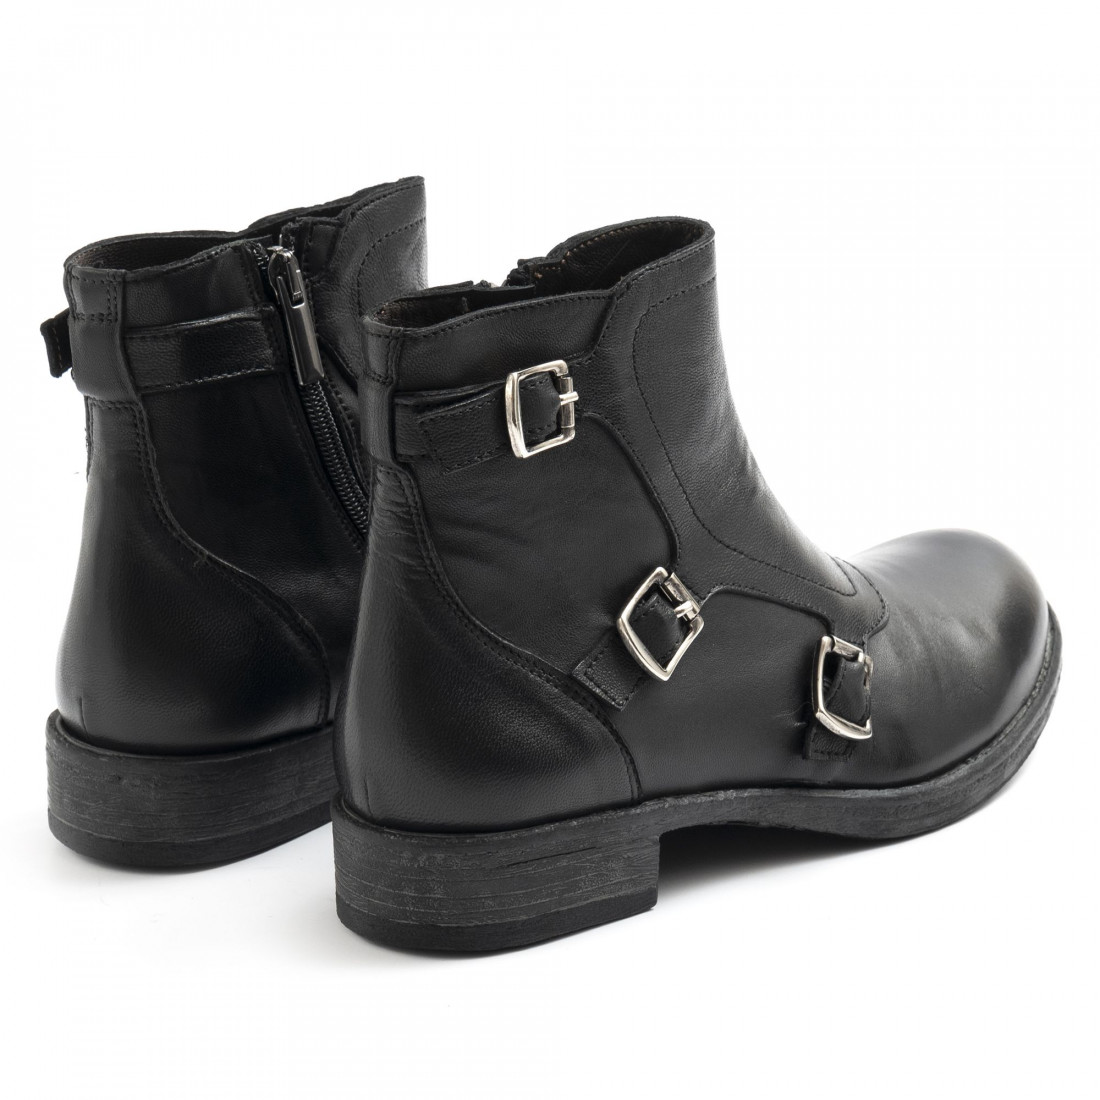 Black leather Sangiorgio ankle boot with buckles